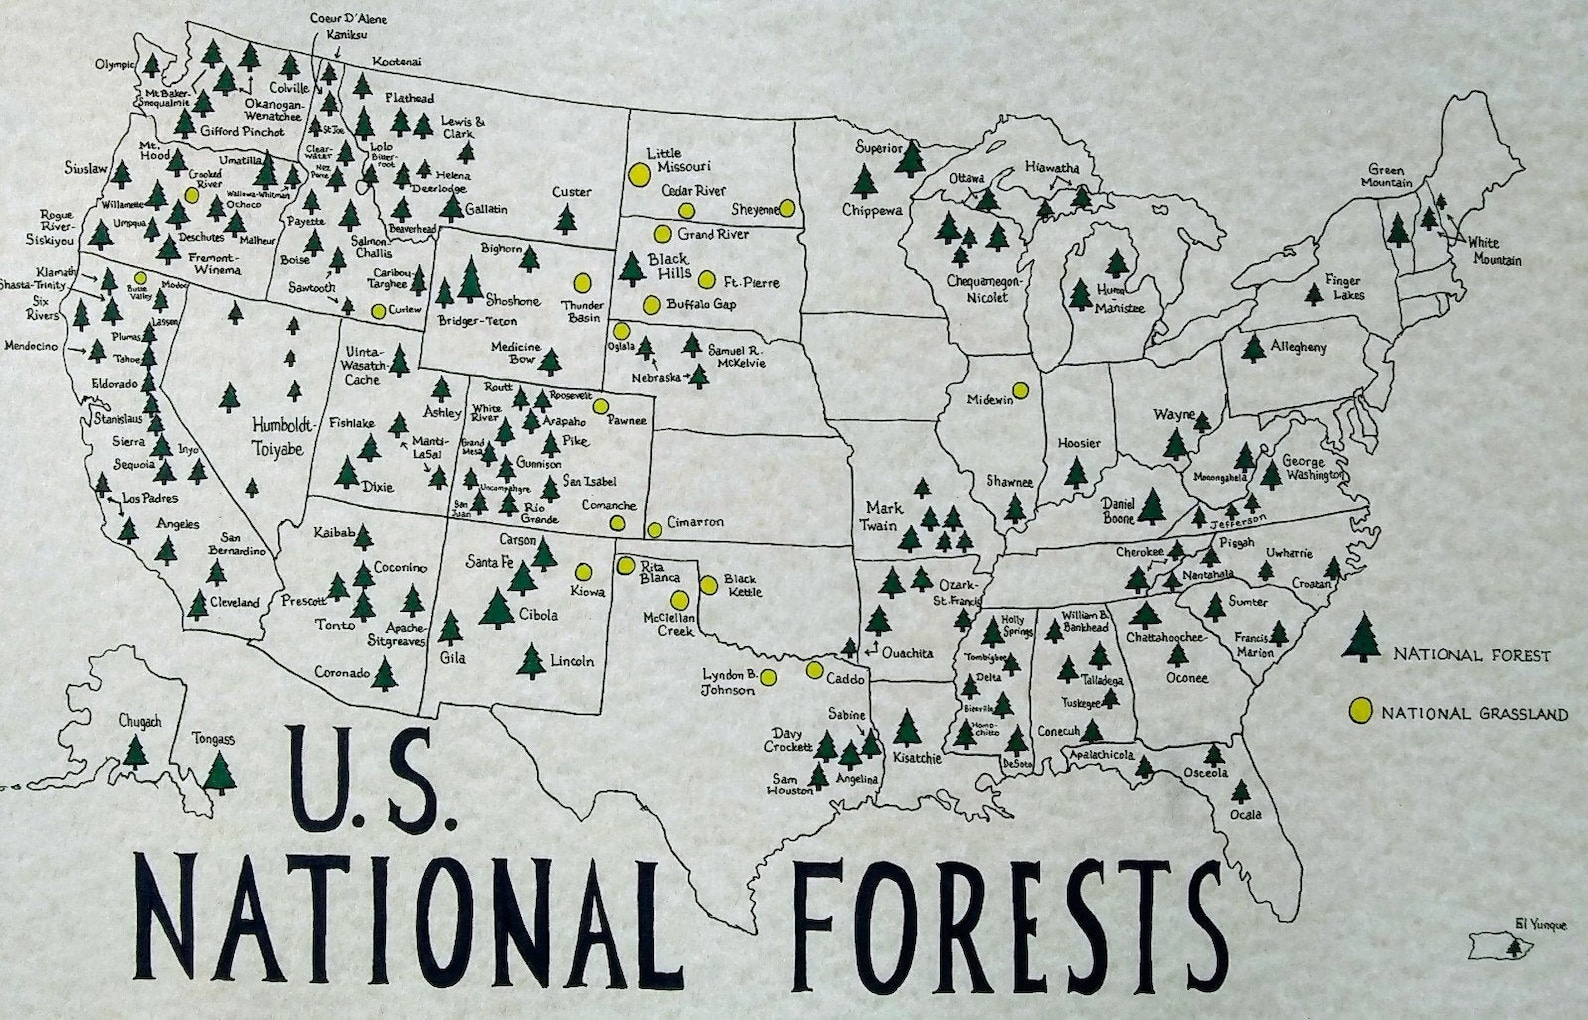 U.S. National Forests Map - Etsy